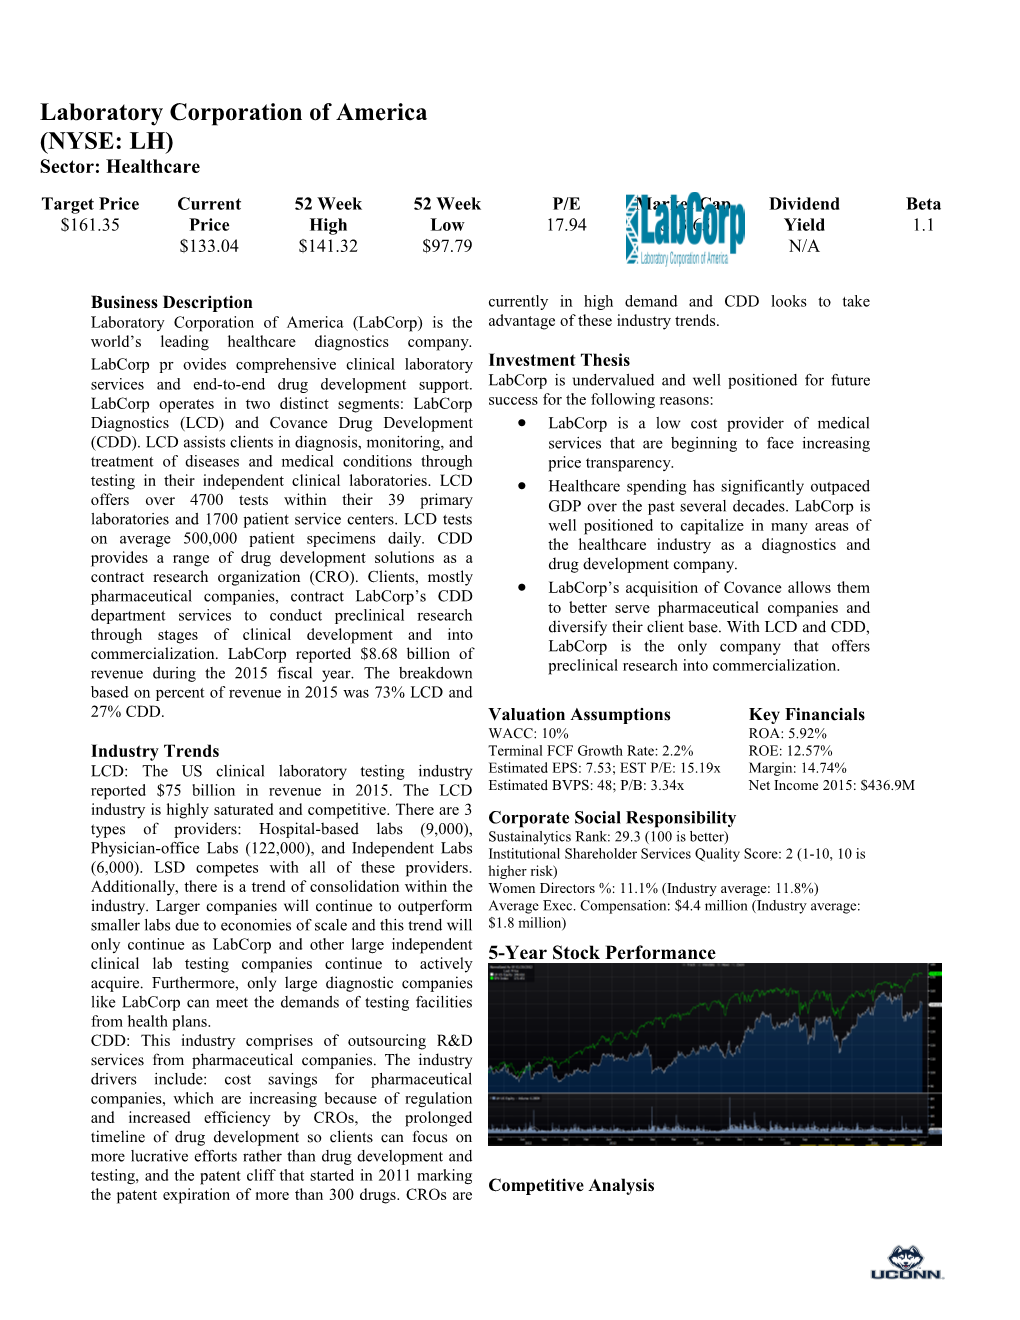 Laboratory Corporation of America (NYSE: LH) Sector: Healthcare